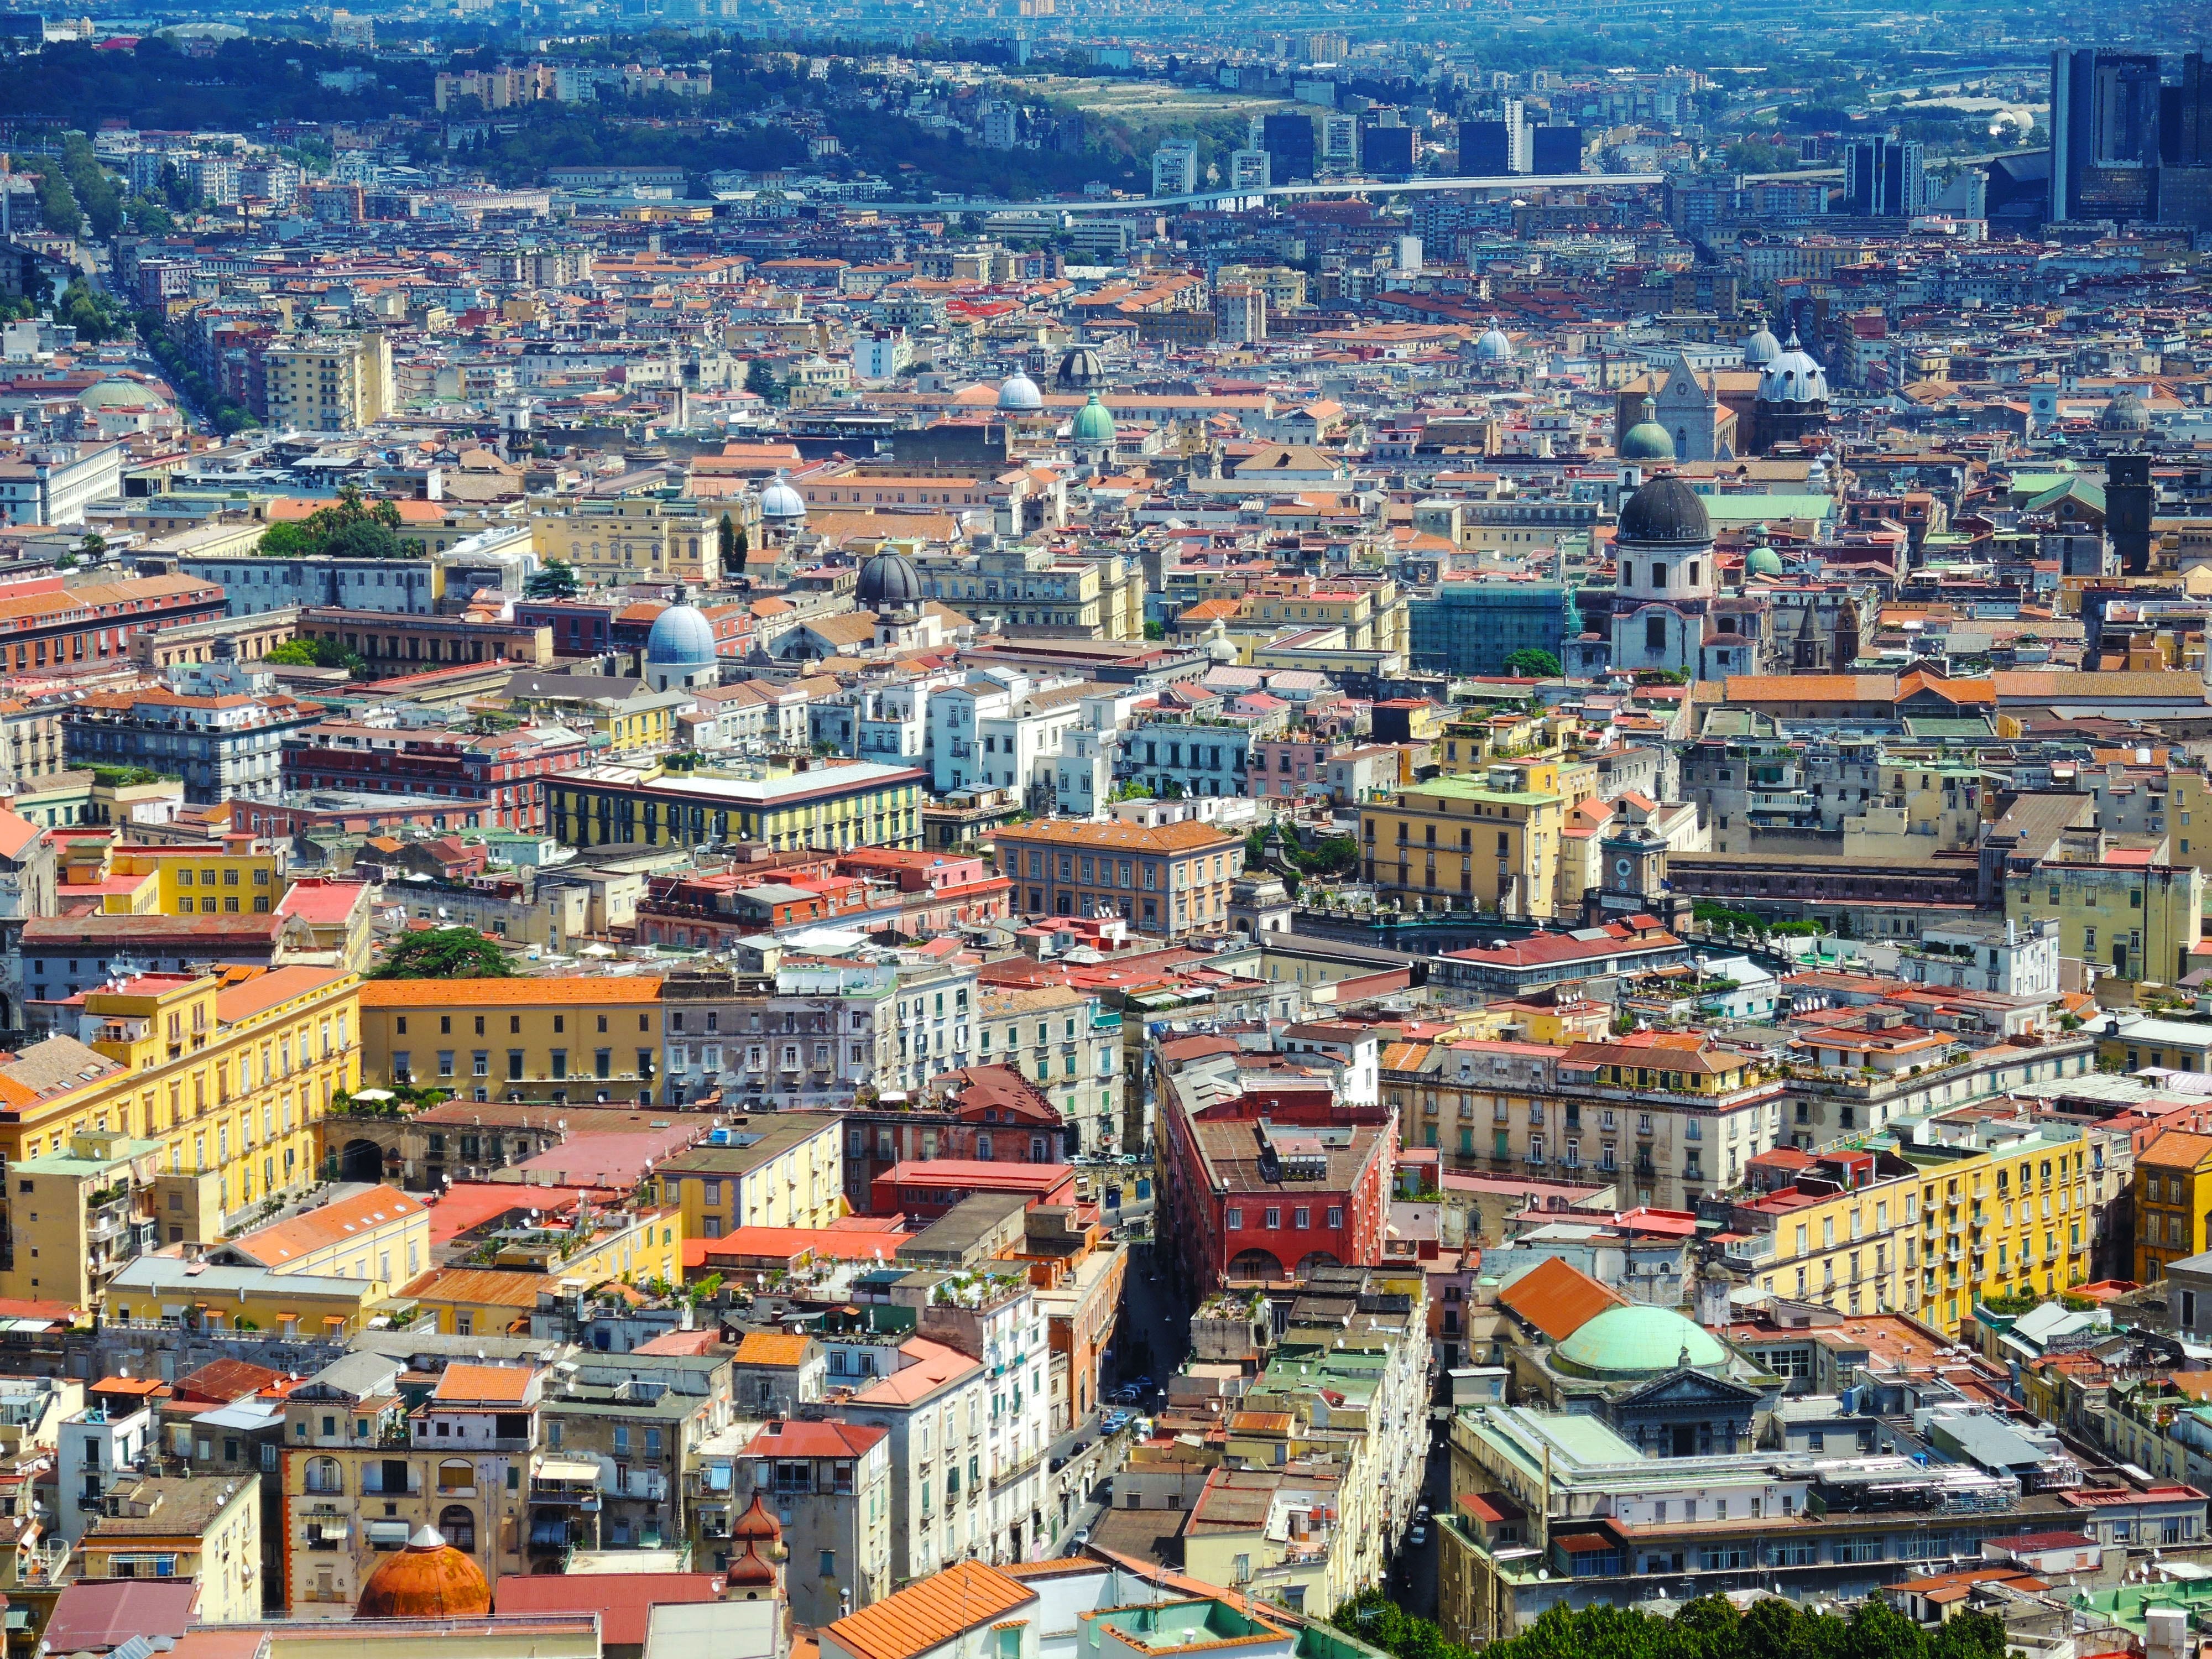 Naples is one of the most famous places in Italy - here's why